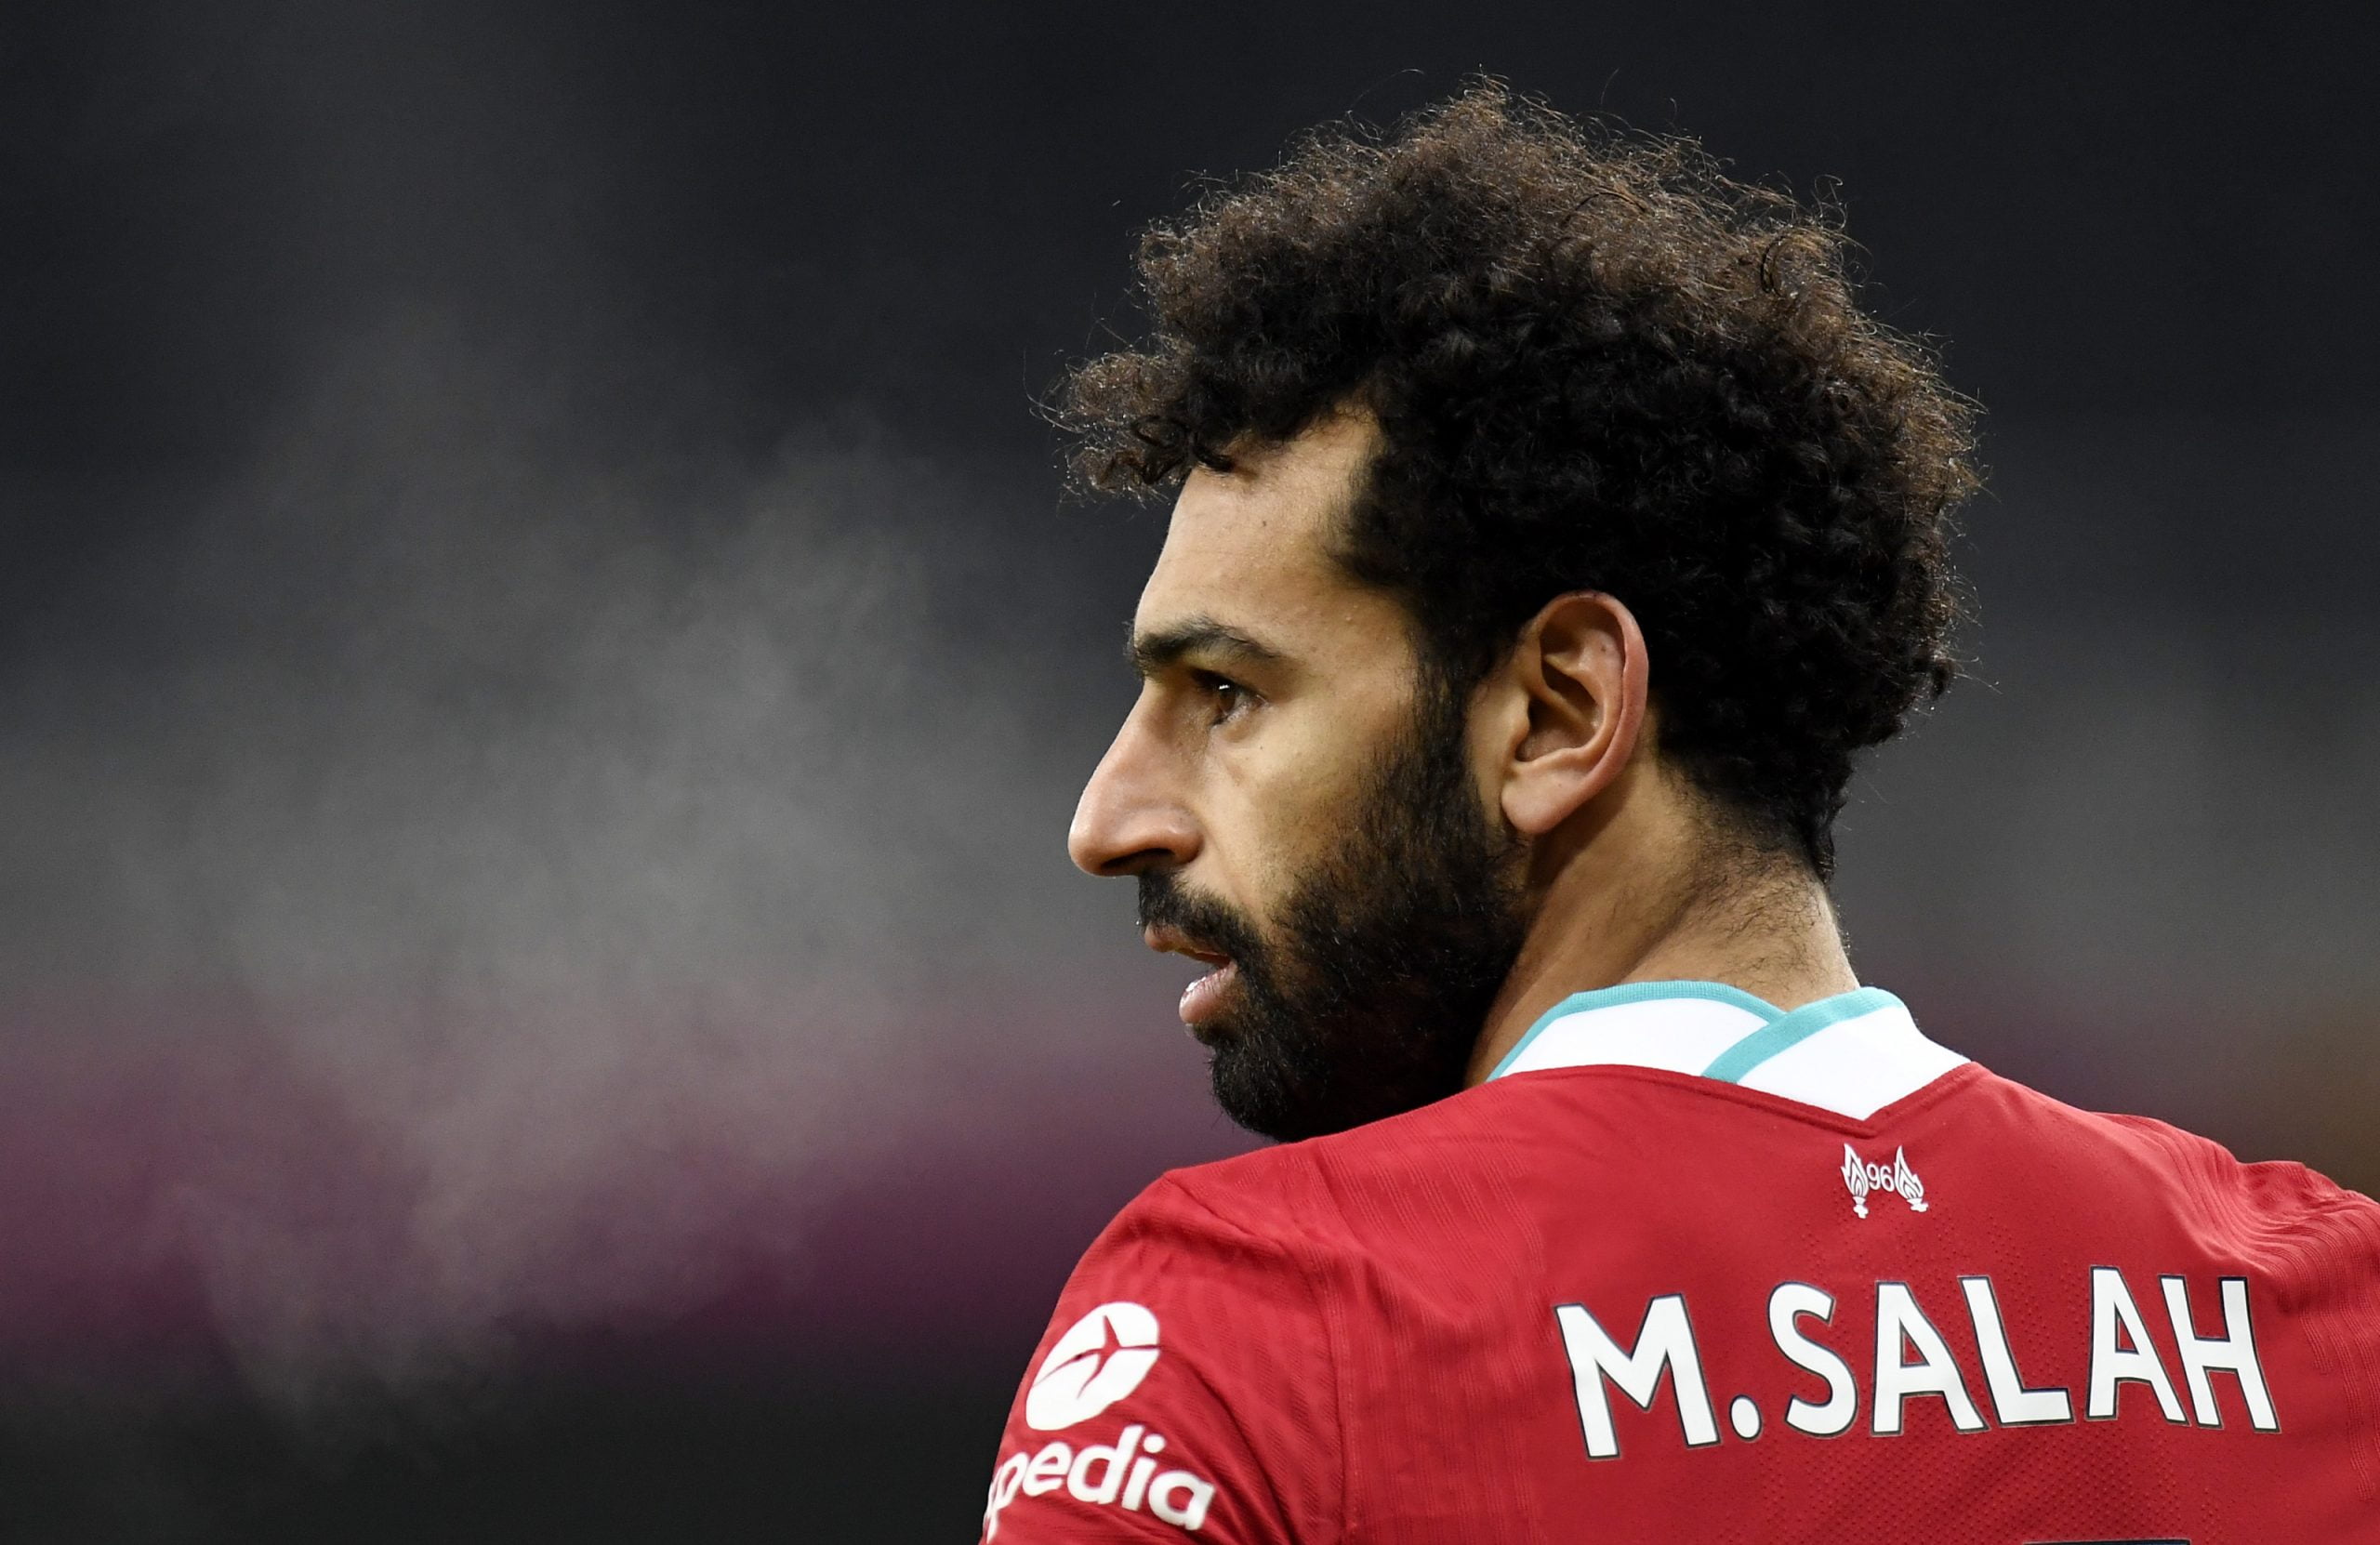 EPL: Danny Murphy reveals club Liverpool's Salah will join next